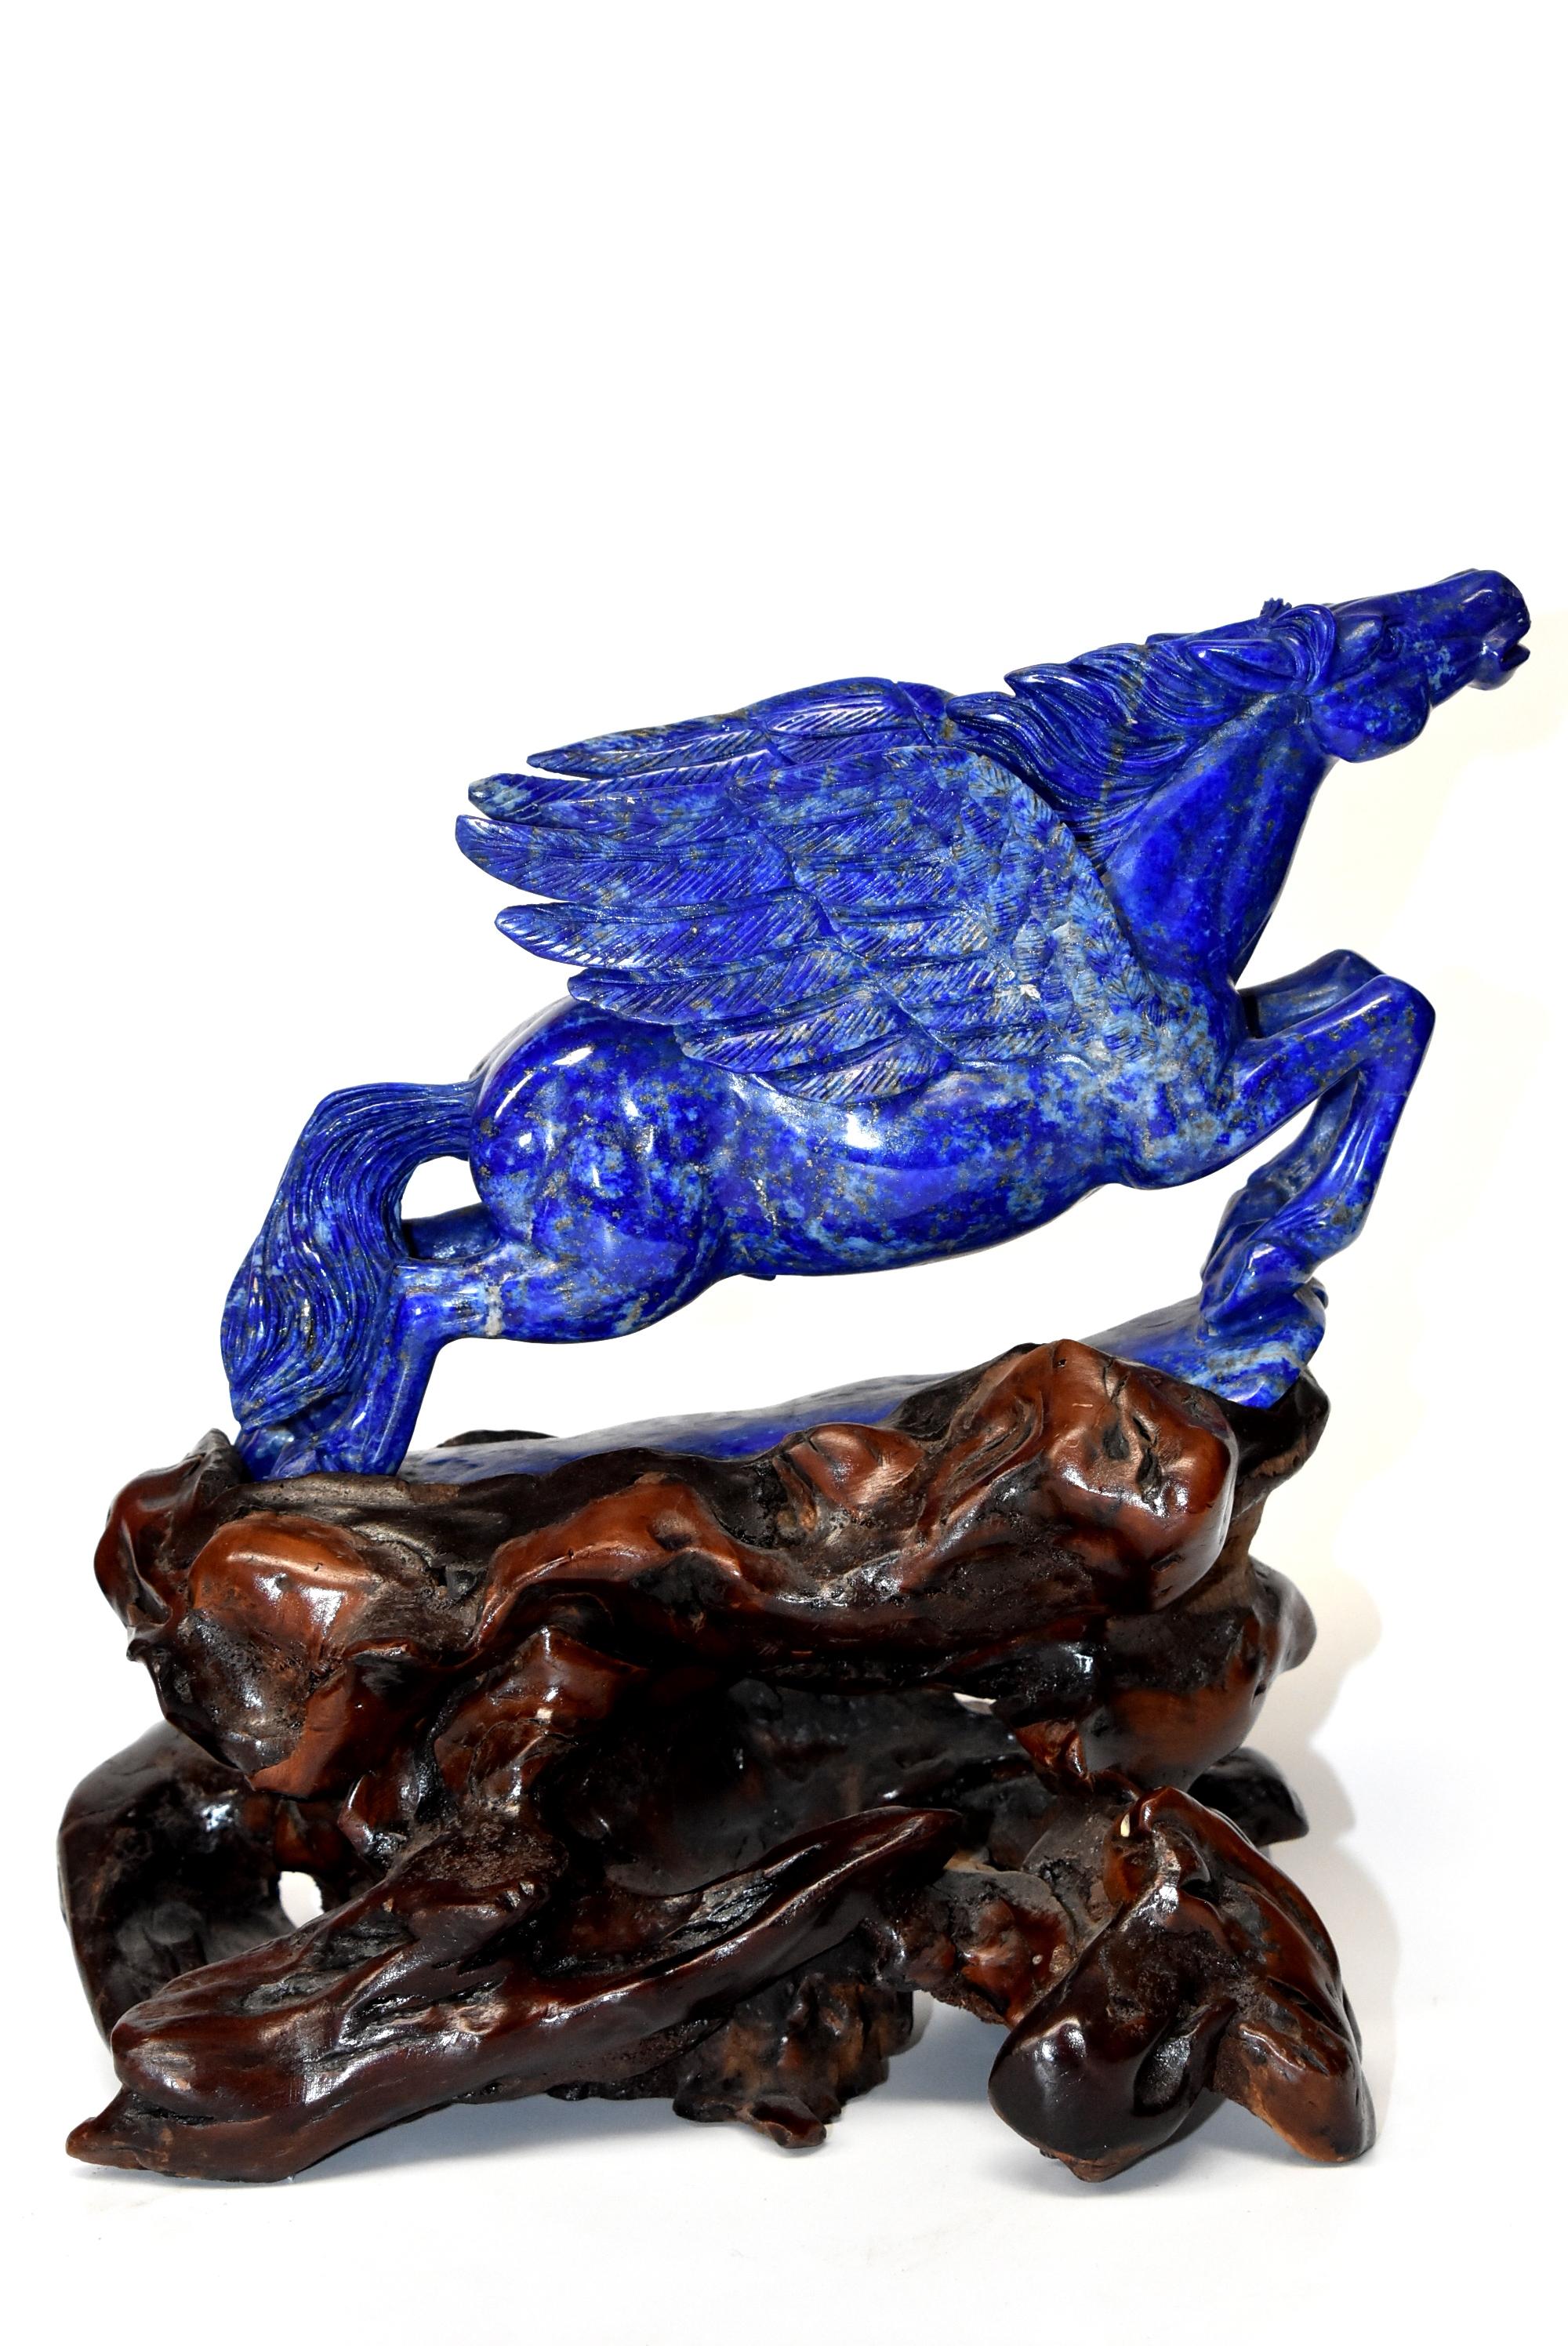 An absolutely stunning all natural lapis lazuli Pegasus sculpture. The 4.5 lb stone is a brilliant royal blue with beautiful glittering of gold and white snow spots. Fantastic work done by a locally renowned sculptor, Shi Dan Xiu. He is known for